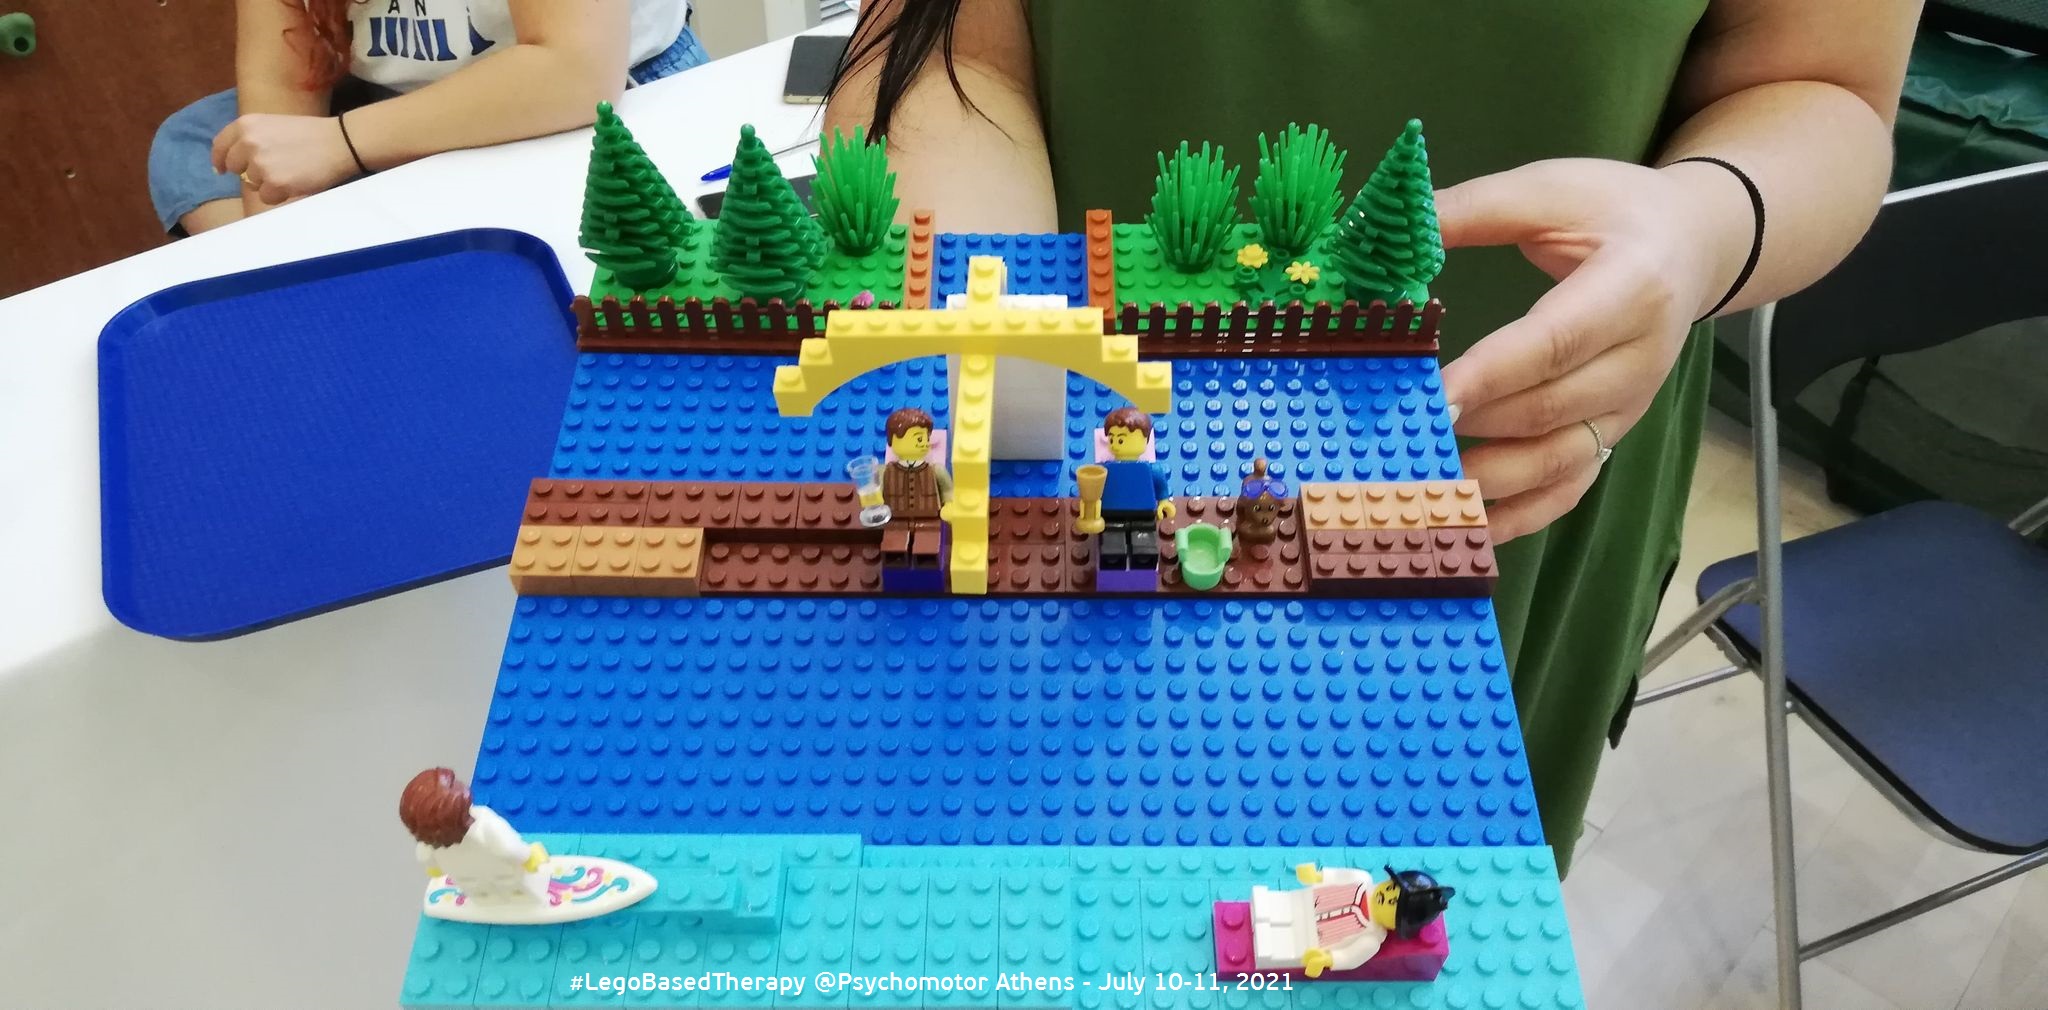 LEGO-based-Therapy-training-athens